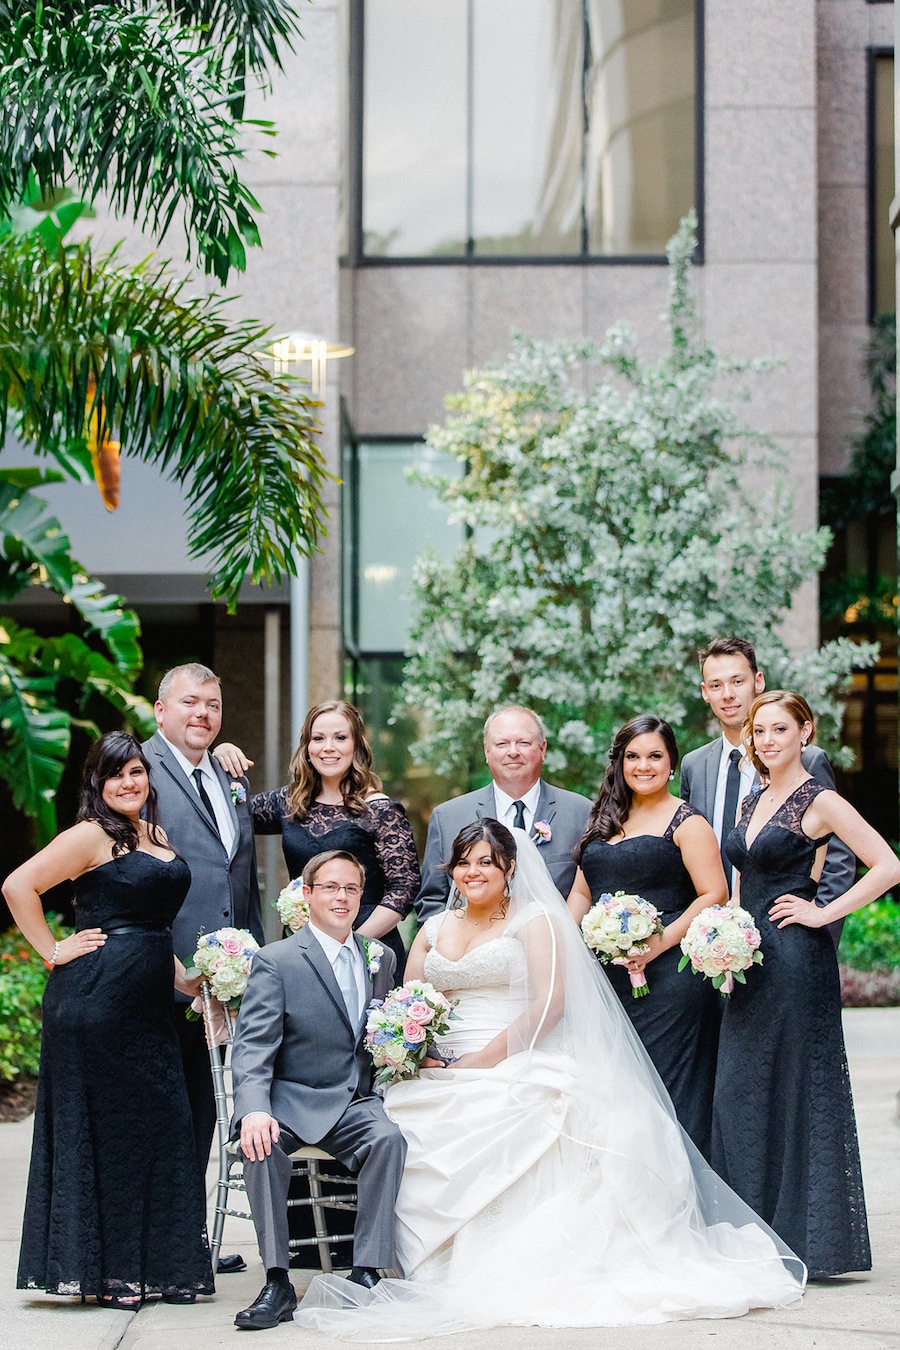 Bridal Party Wedding Portraits with Black Bridesmaid Dresses | Ailyn La Torre Photography